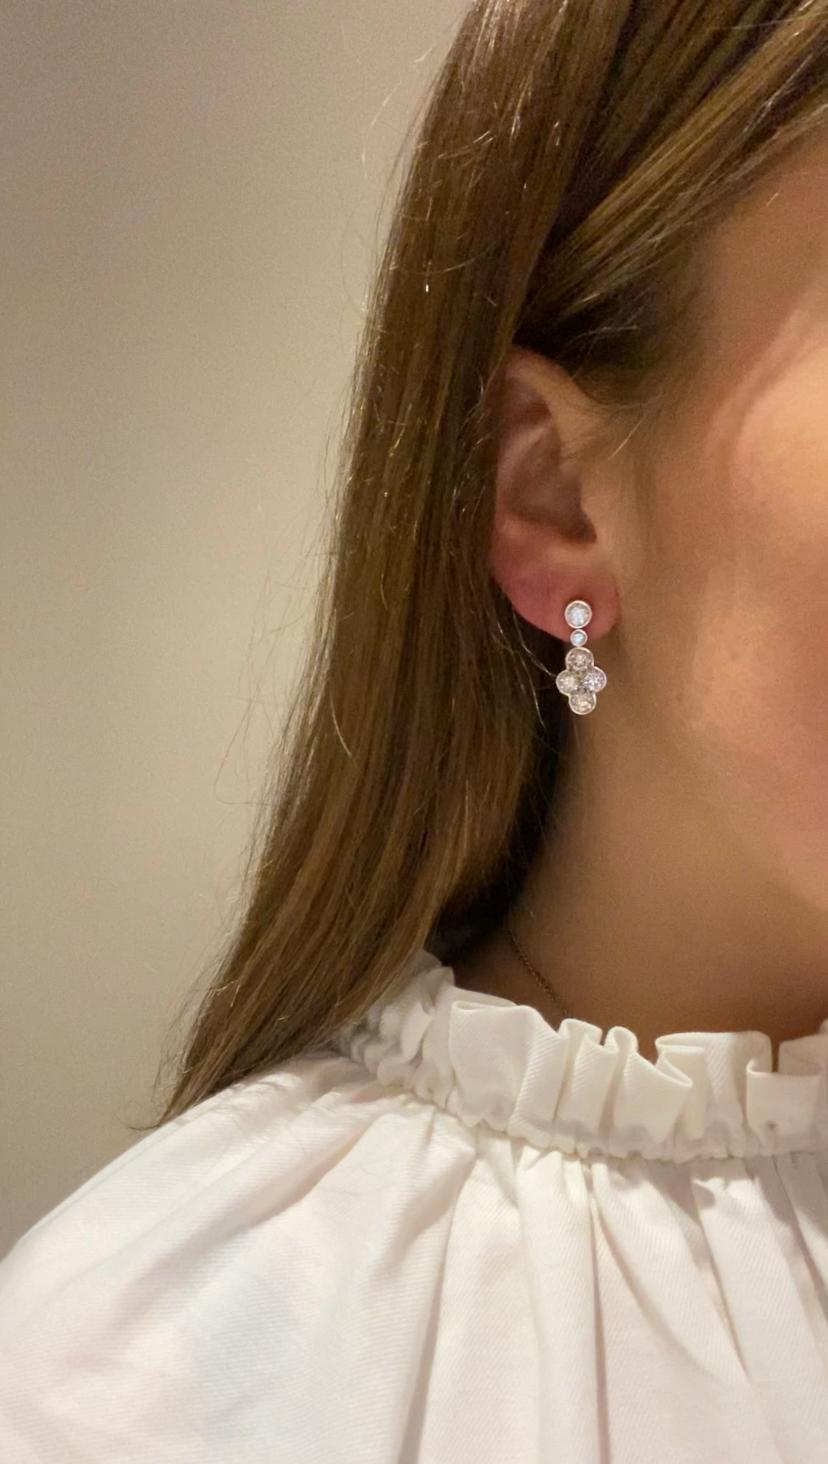 Those earrings have been made by our craftsman in Antwerp, Belgium. 
White-gold Pendant Earrings.18K White gold earrings set with 10 diamonds for a total of 3.54 Carats (Estimated H colour - Si purity). The diamonds come directly from Antwerp, world